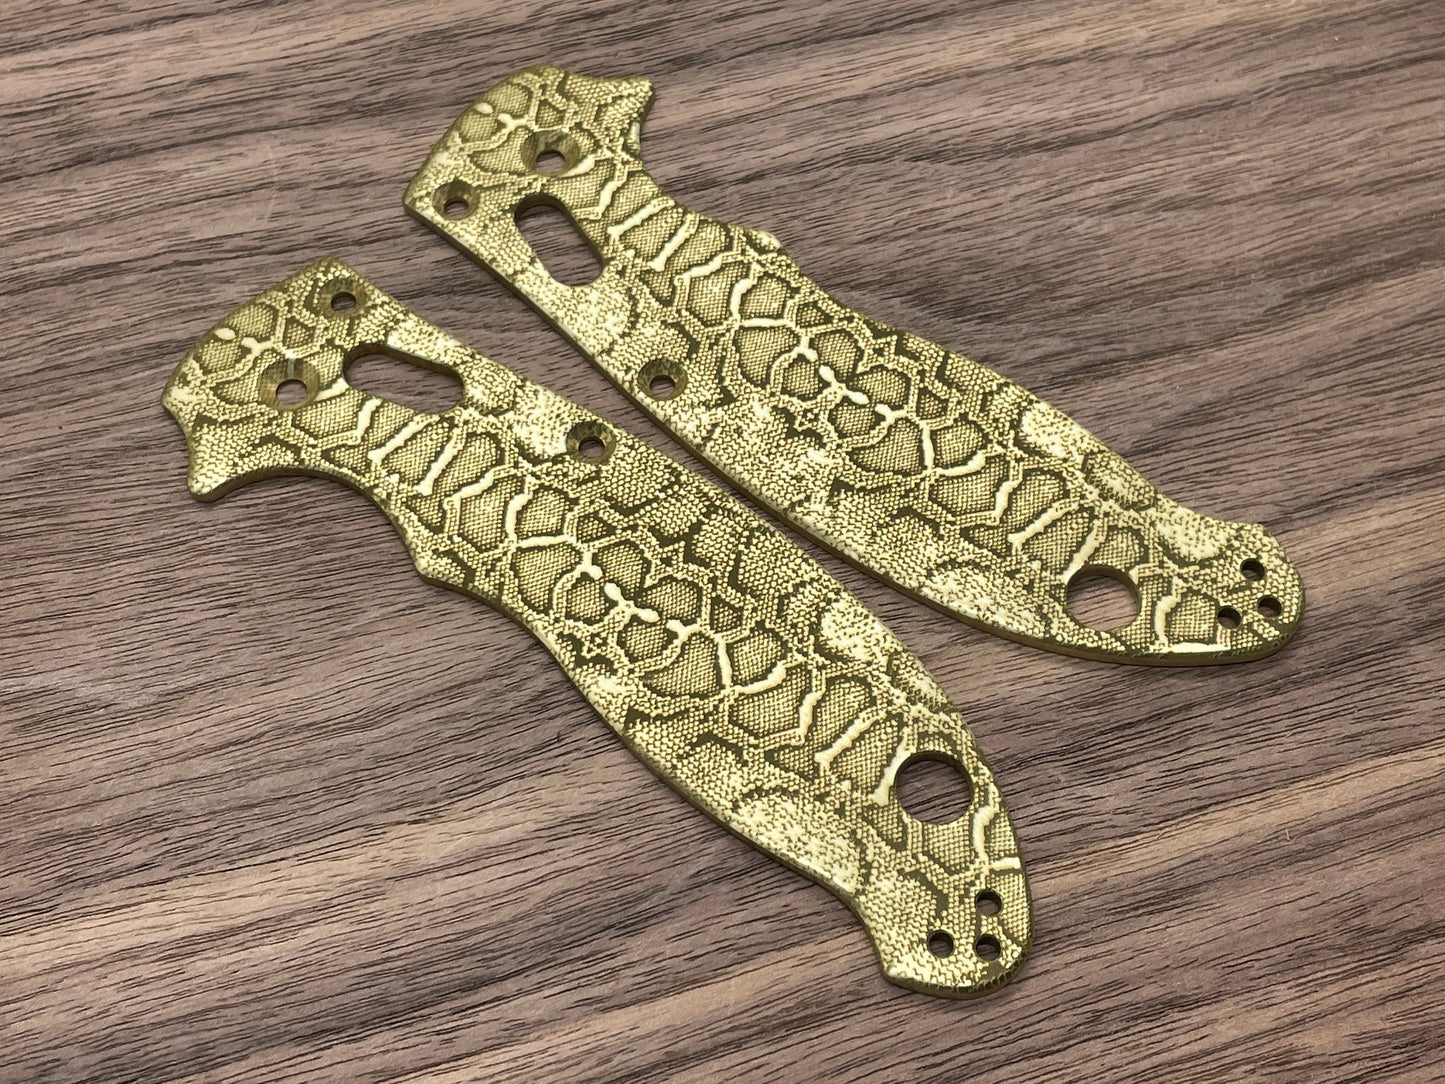 REPTILIAN engraved Brass scales for Spyderco MANIX 2